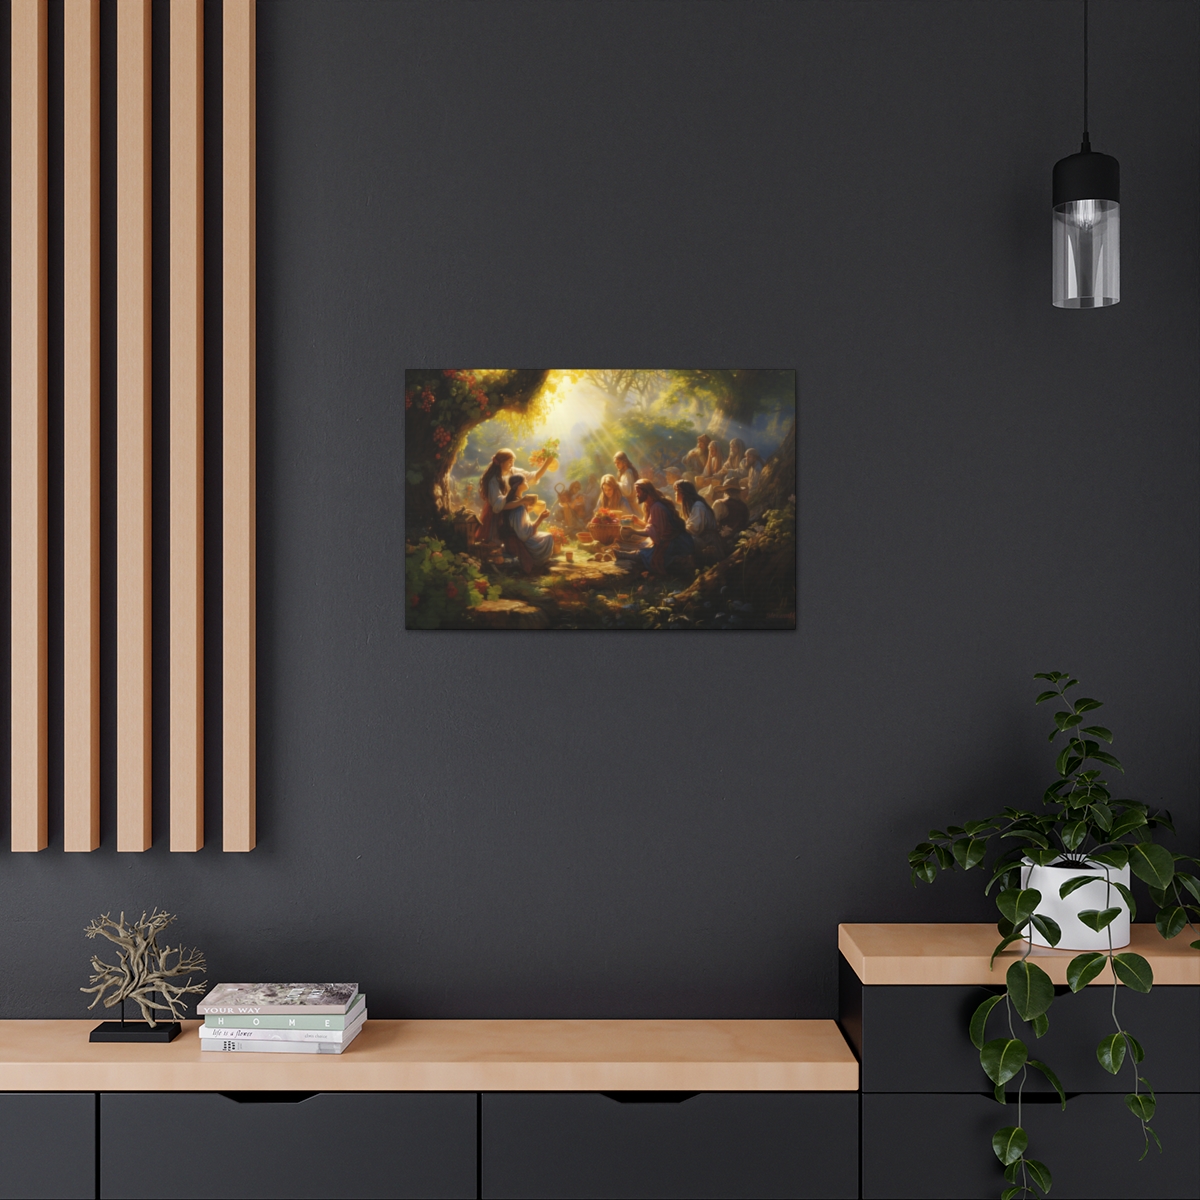 Forest Art Canvas Print: Feasting Among The Trees